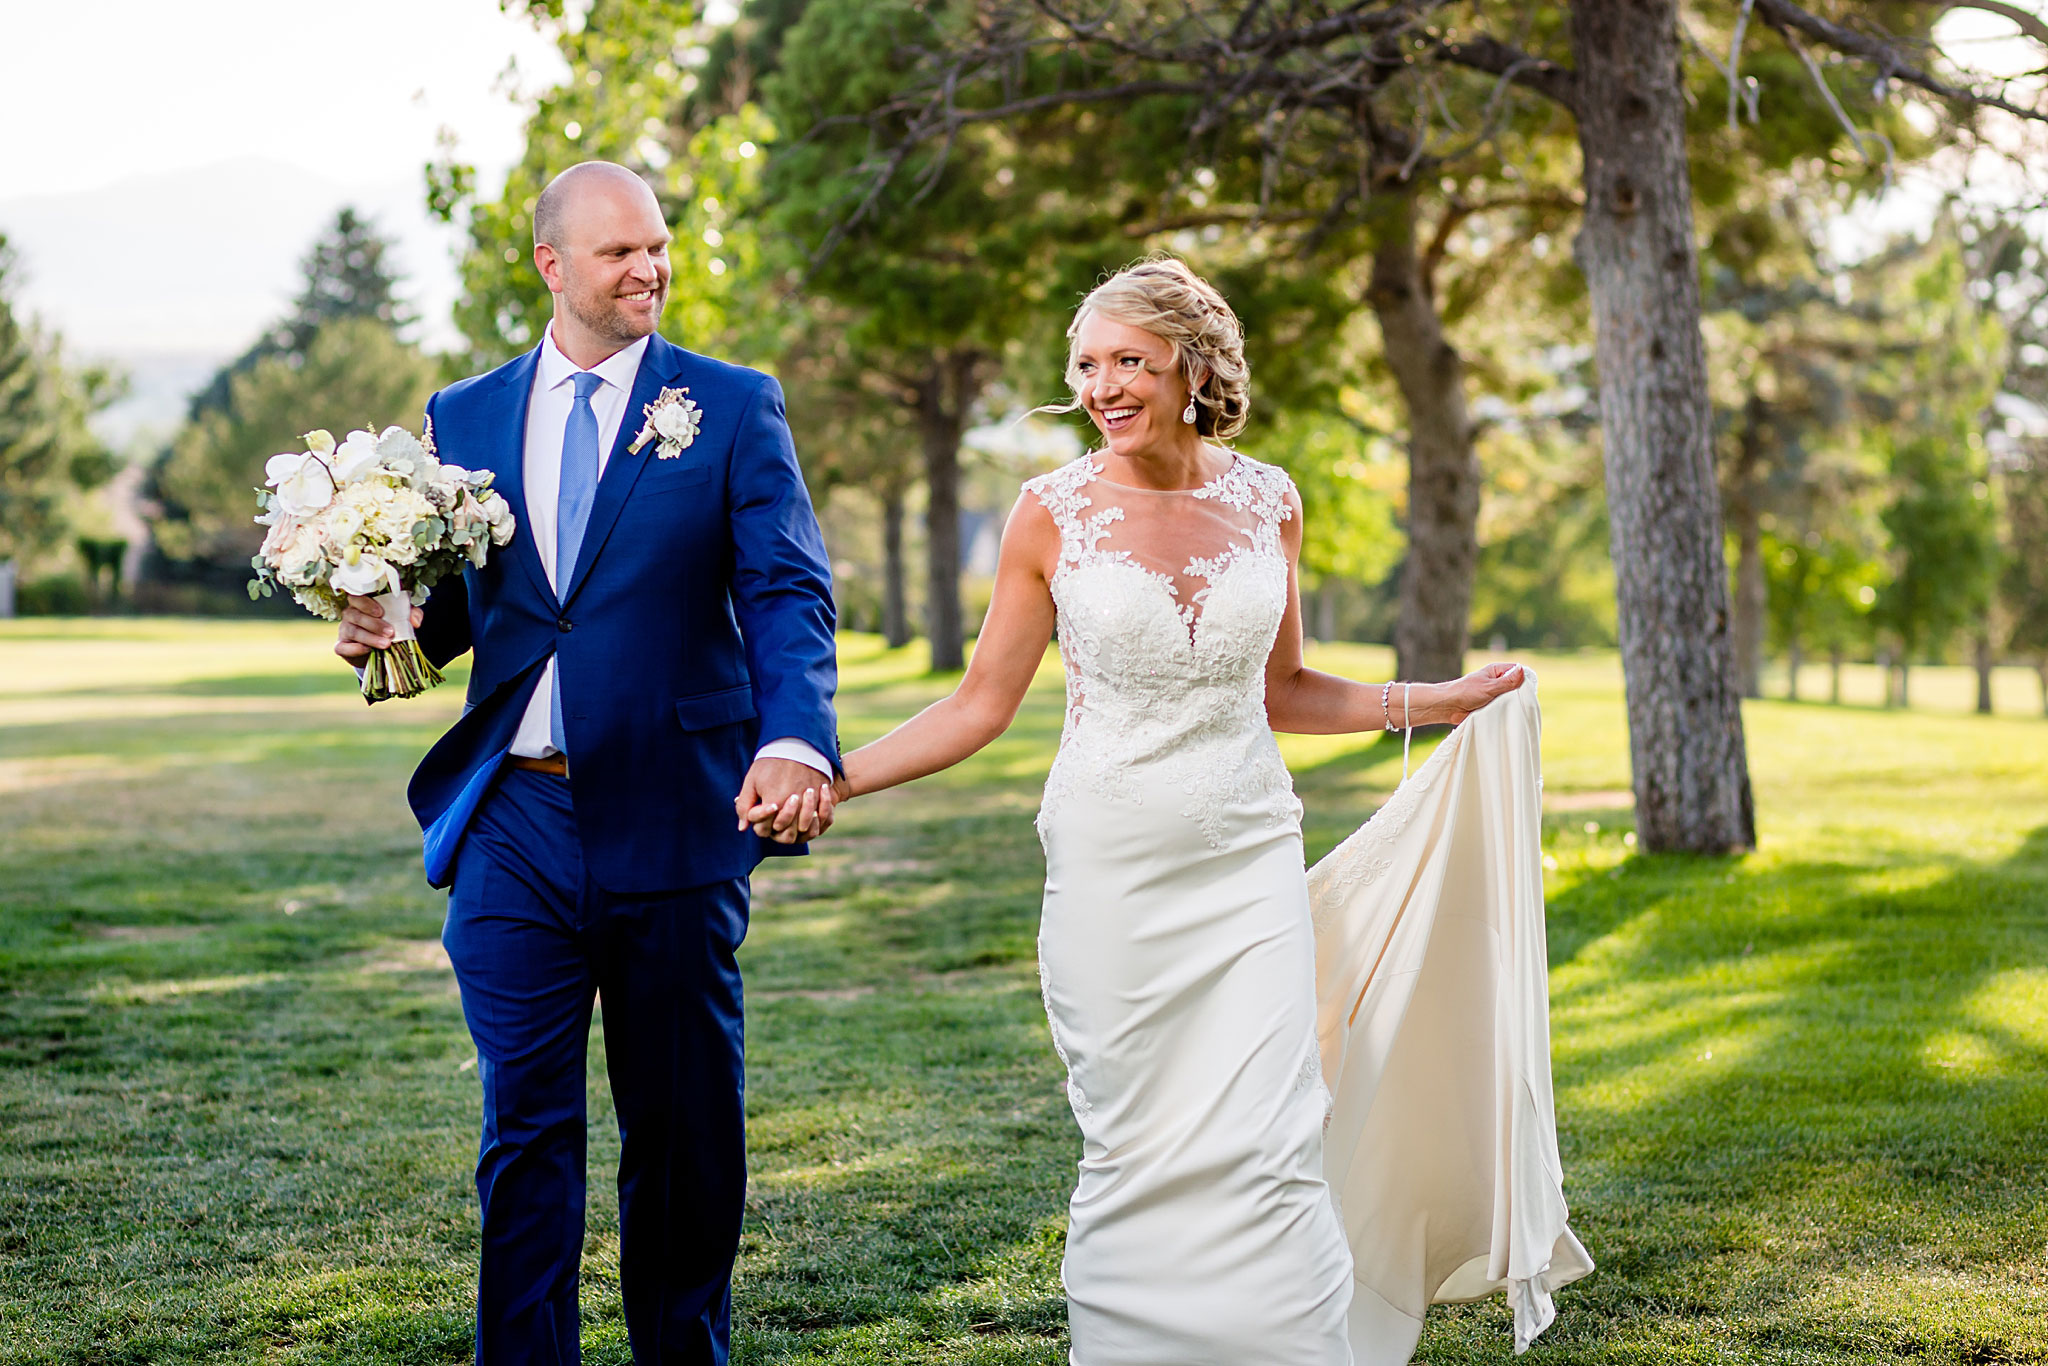 Bride and Groom walking together. Kelli & Jason's golf course wedding at The Ranch Country Club by Colorado Wedding Photographer Jennifer Garza, Small wedding ideas, Intimate wedding, Golf Course Wedding, Country Club Wedding, Summer Wedding, Golf Wedding, Wedding planning, Colorado Wedding Photographer, Colorado Elopement Photographer, Colorado Elopement, Colorado Wedding, Denver Wedding Photographer, Denver Wedding, Wedding Inspiration, Summer Wedding Inspiration, Covid Wedding